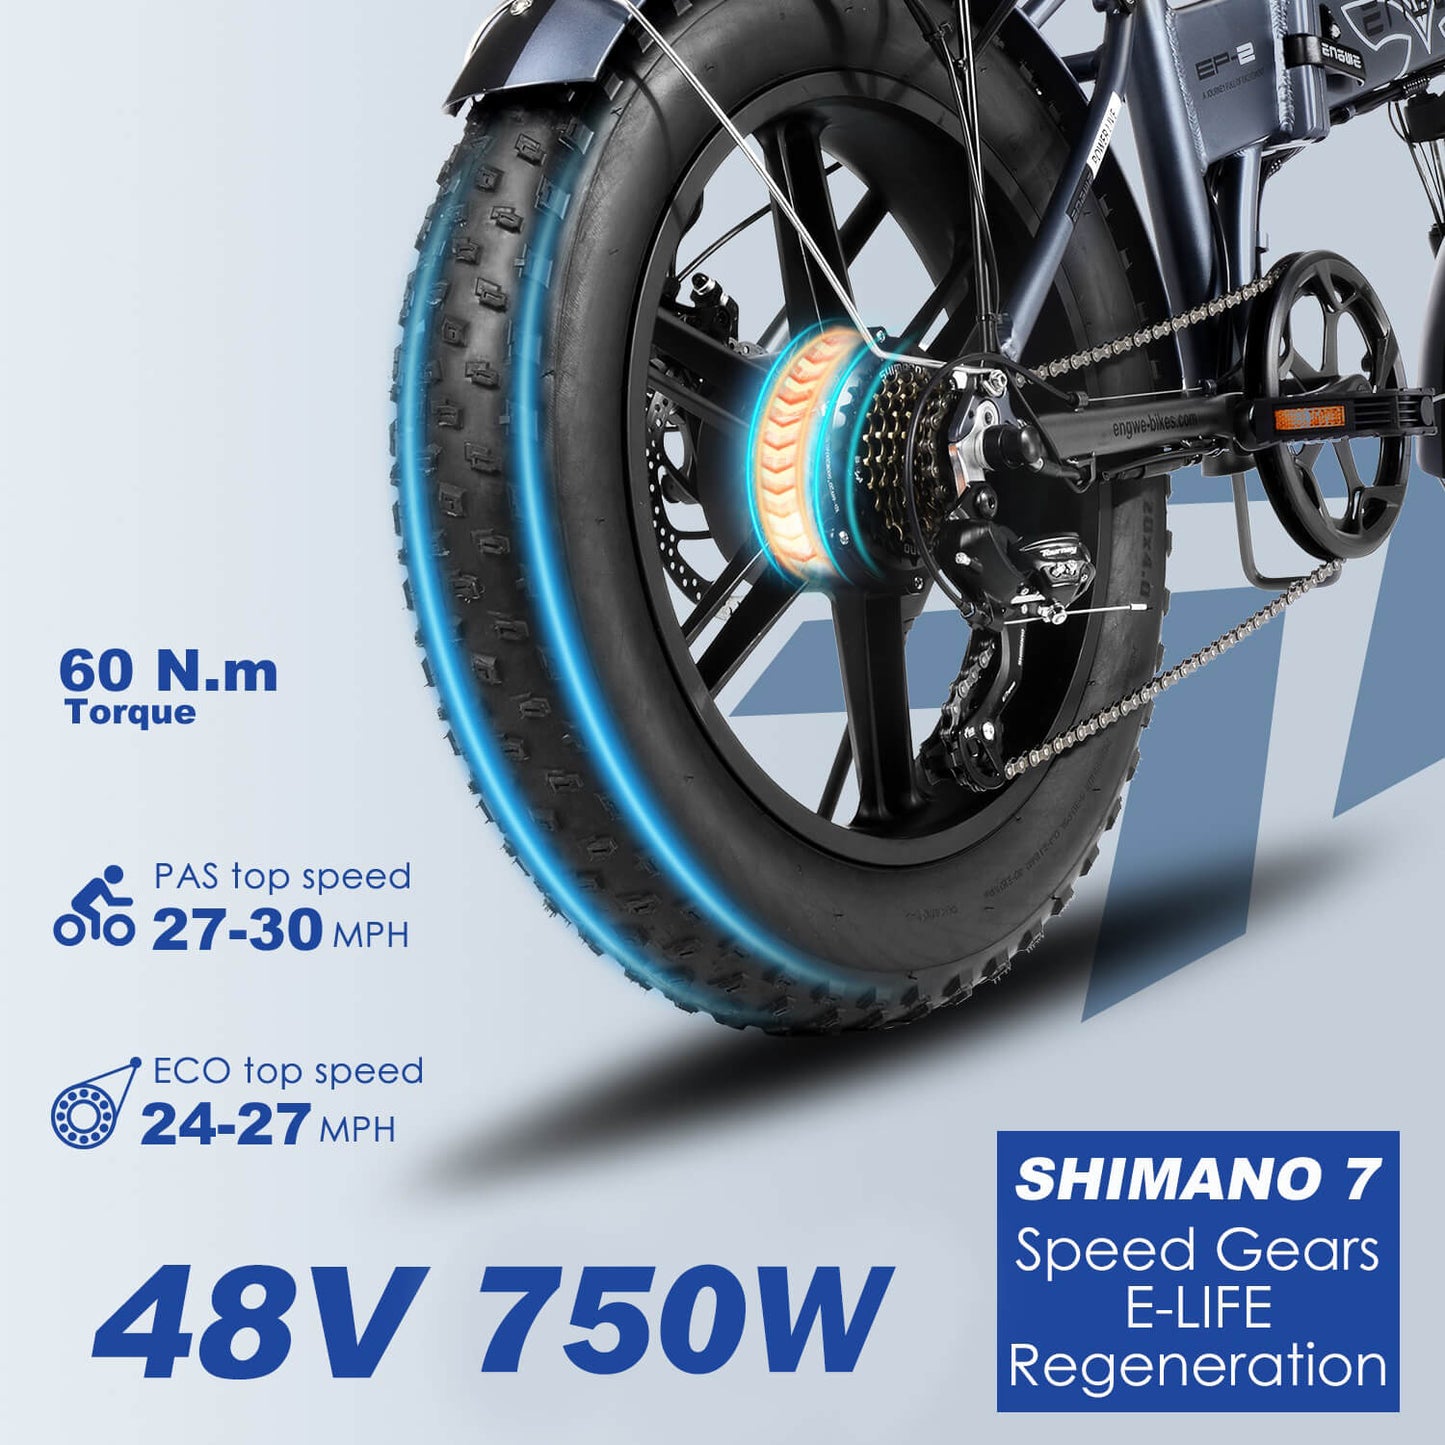 ENGWE EP-2 Pro 750W 120KM Front Suspension Foldable Electric Bike